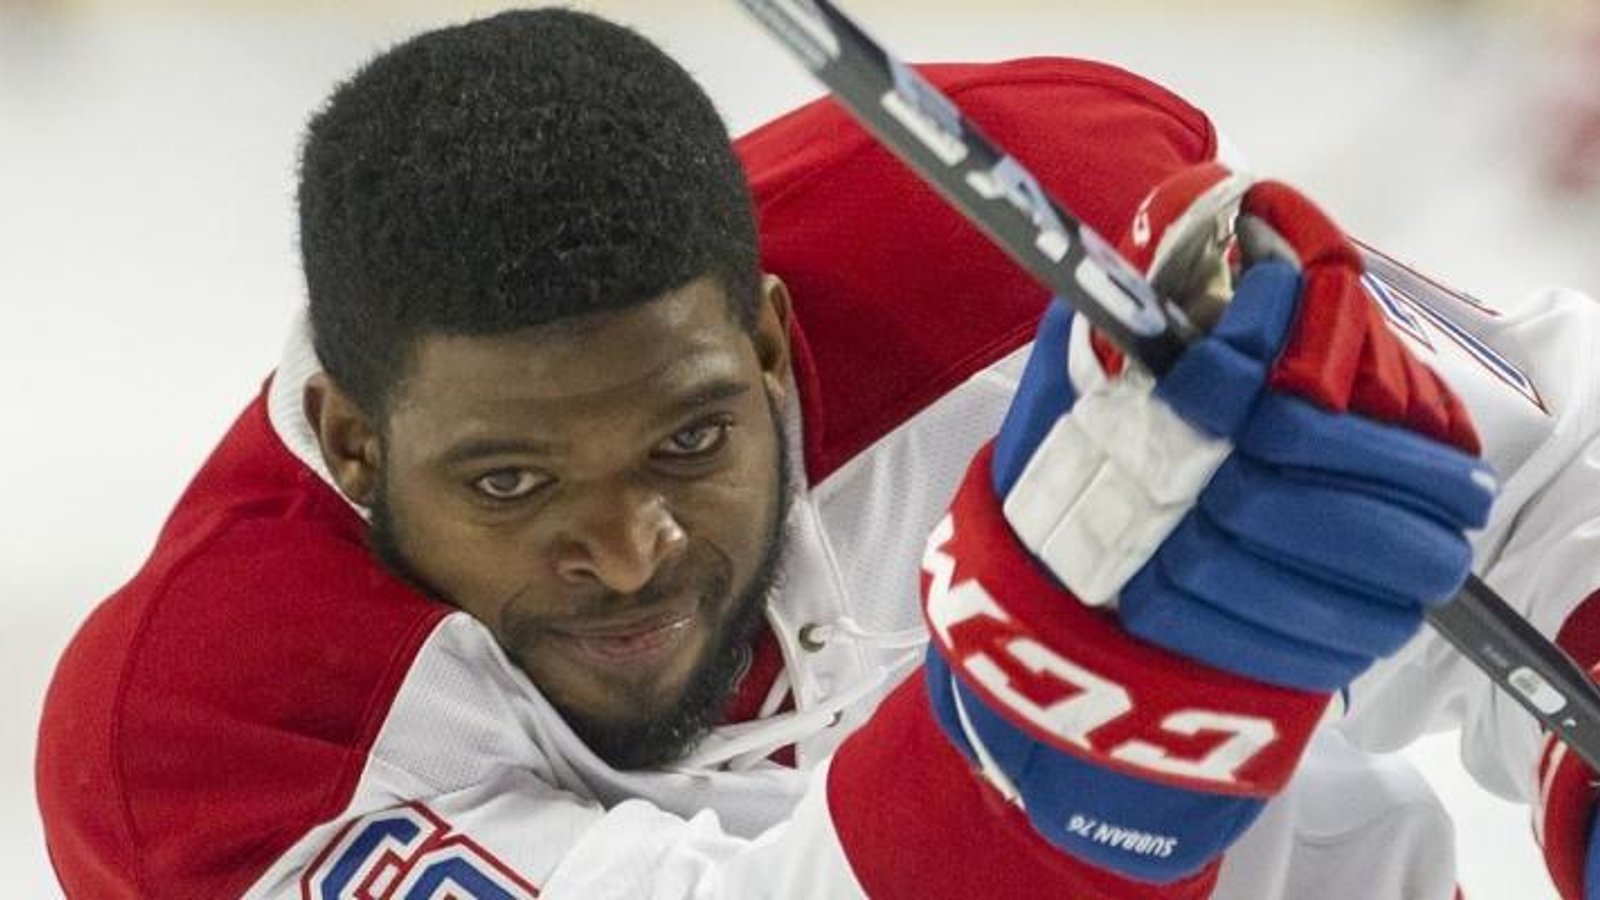 P.K. Subban takes out his own teammate with a shot to the face.